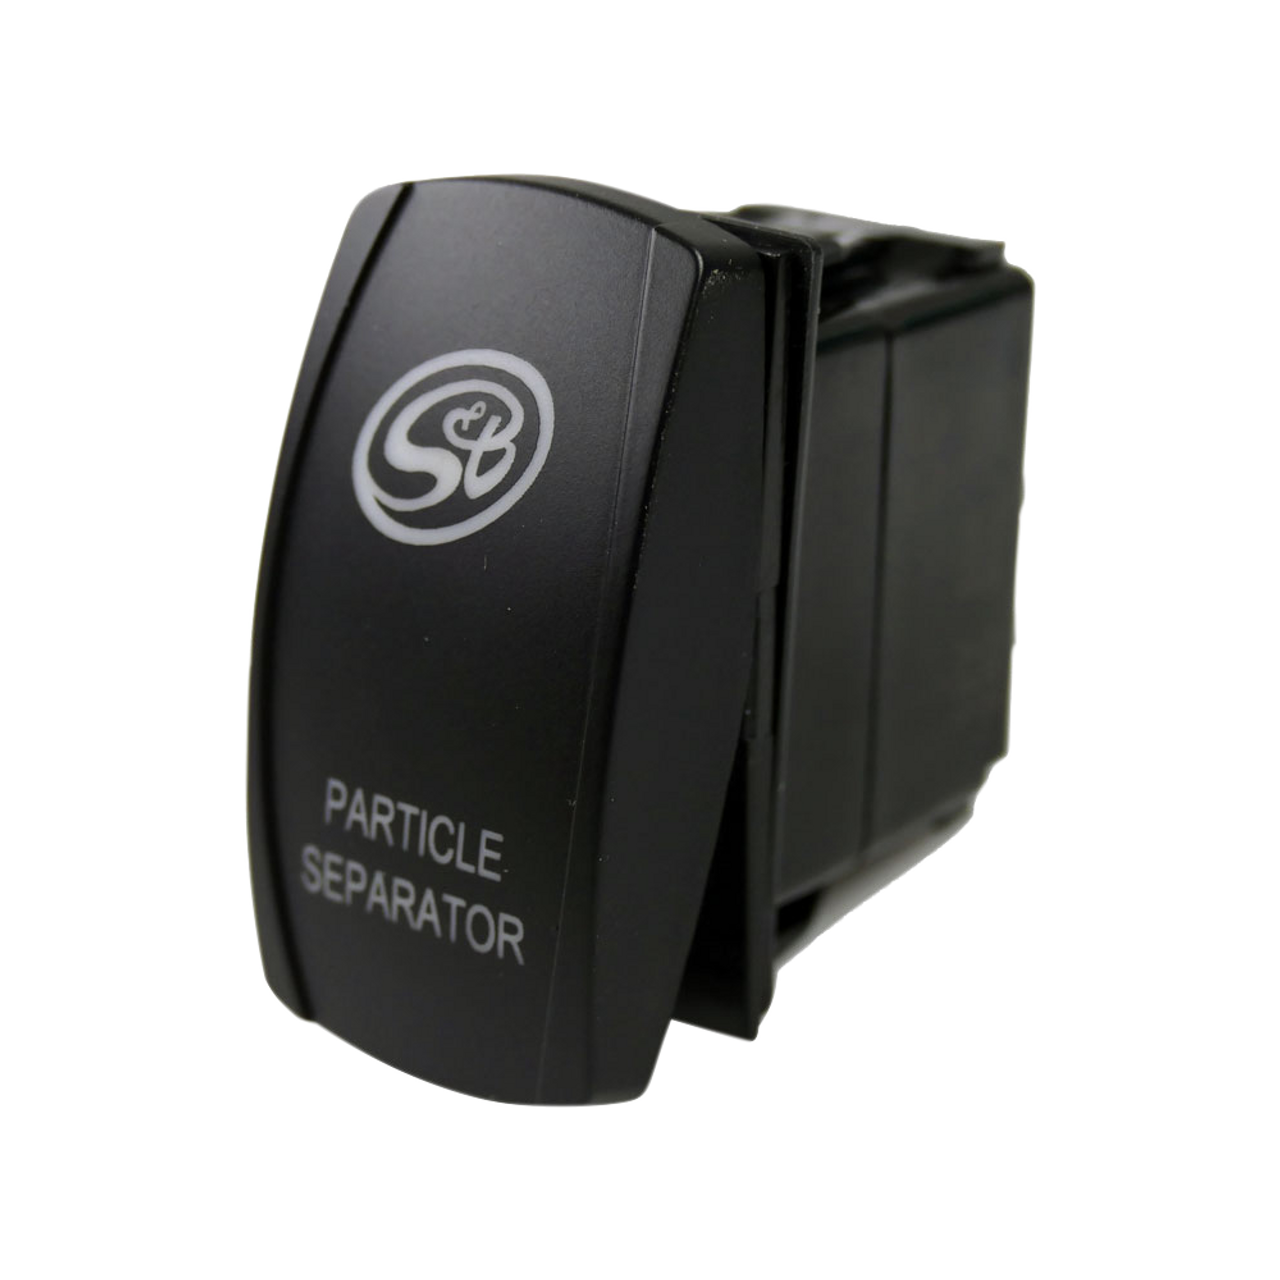 LED Rocker Switch with S&B Logo for Particle Separator